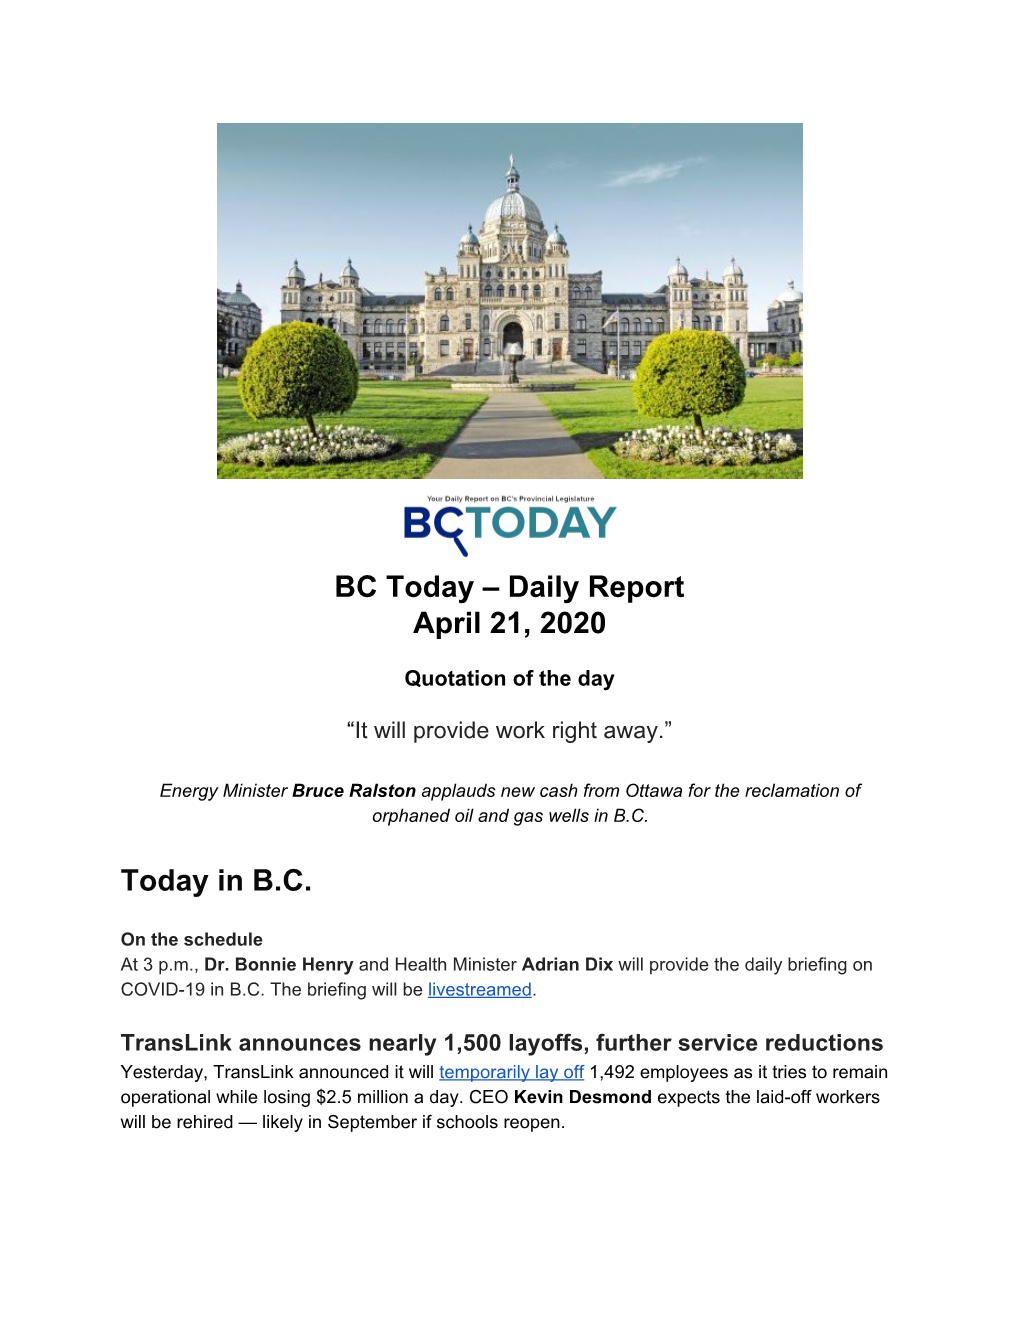 BC Today – Daily Report April 21, 2020